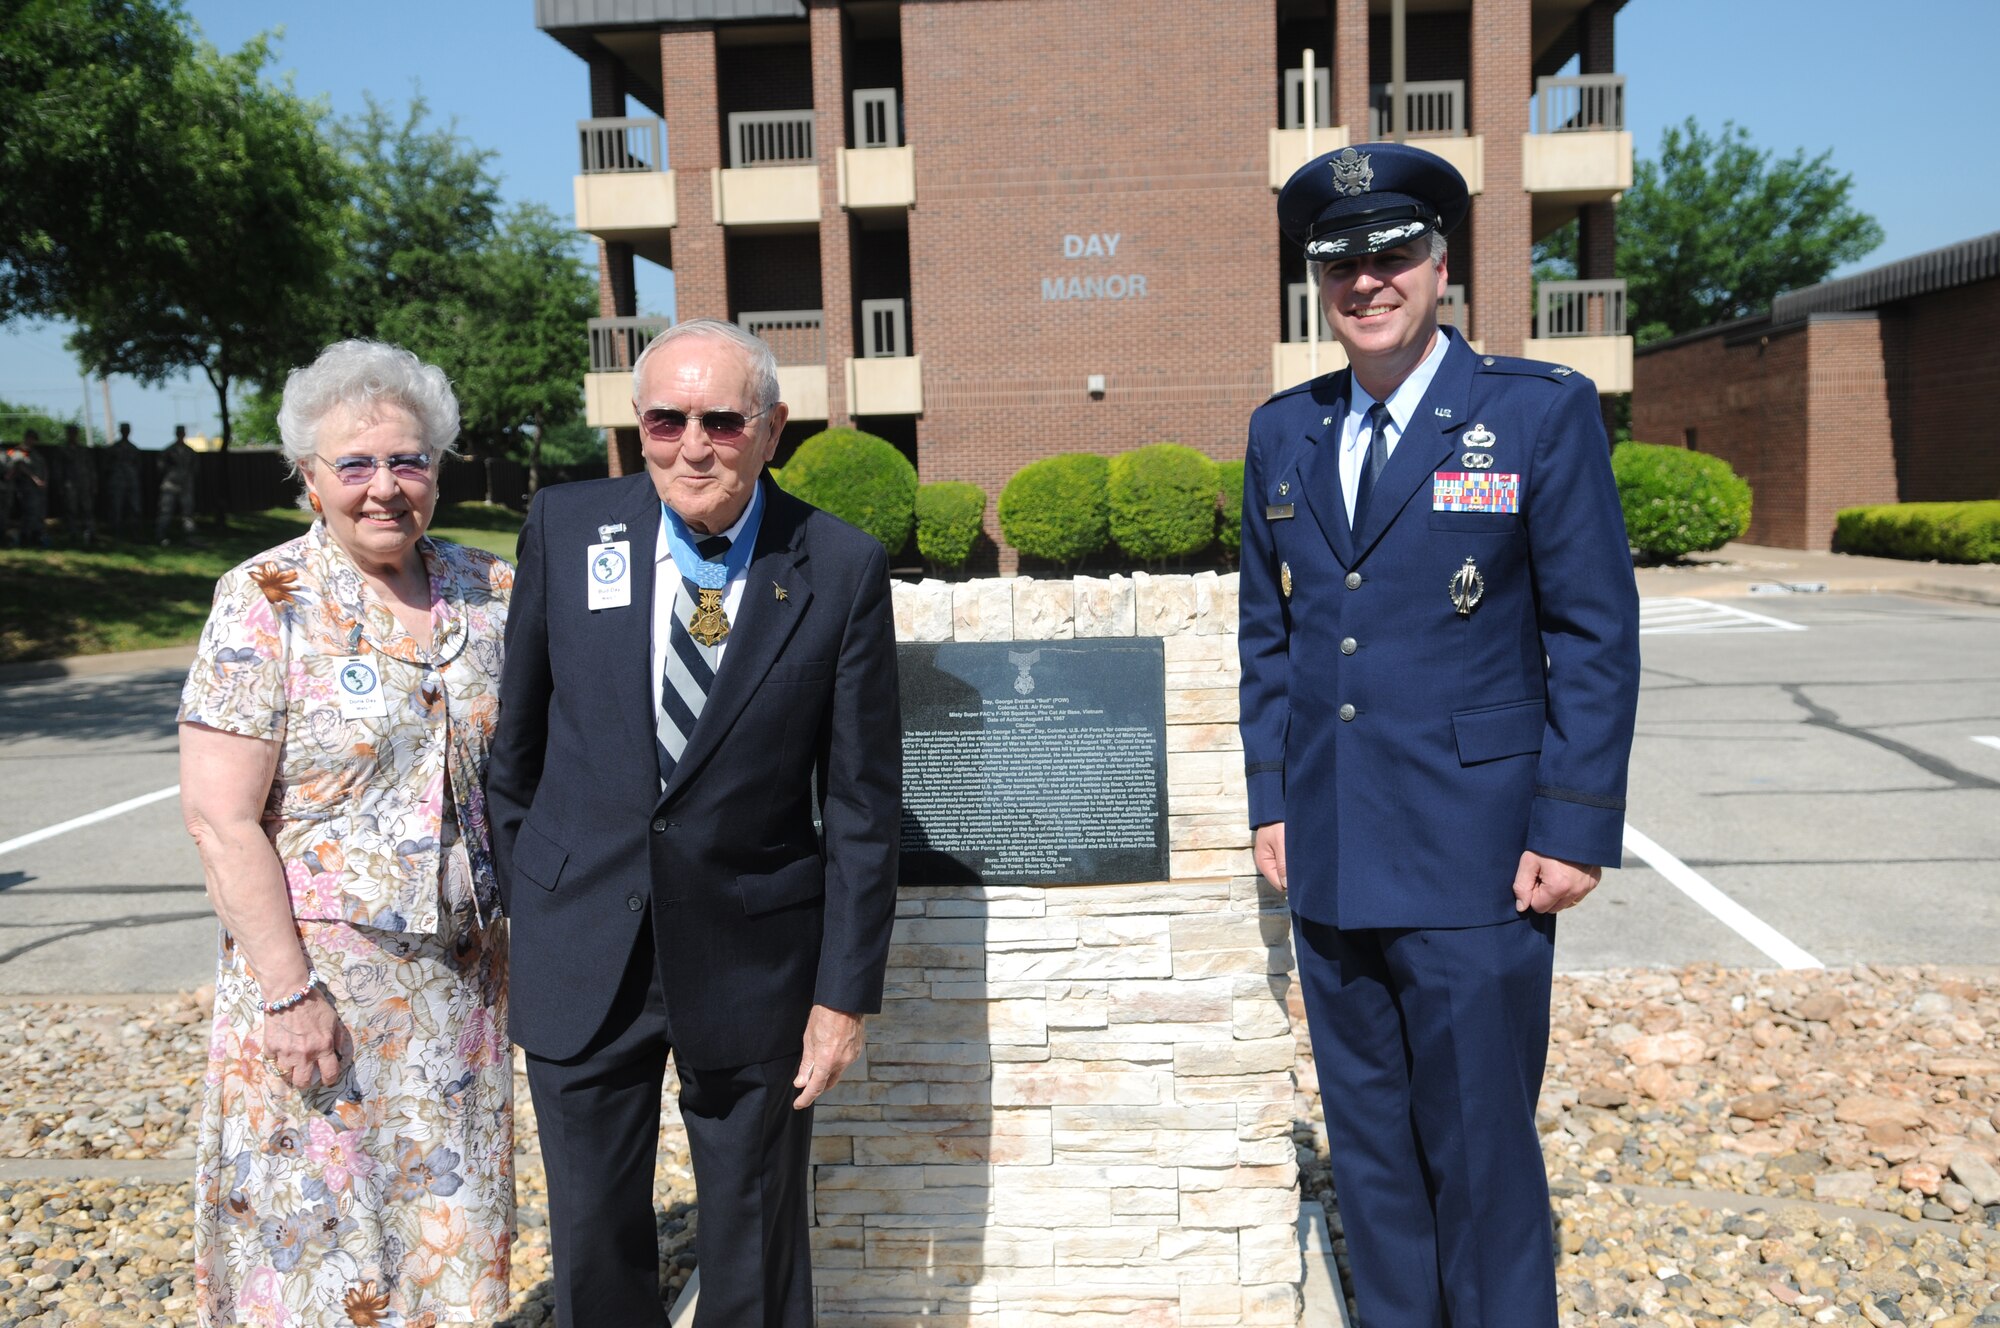 GOODFELLOW AIR FORCE BASE, Texas – Retired Col. George E. “Bud” Day accompanied by his wife Doris, and Colonel Thomas Geary, 17th Training Wing commander, unveil the monolith in front of “Day Manor,” May 7, 2010. Two Visiting Officer Quarters were named in honor of retired Air Force Colonels George Day and Leo K. Thorsness, both of whom received the Medal of Honor for actions while serving in Vietnam. (U.S. Air Force photo/Airman 1st Class Clayton Lenhardt)